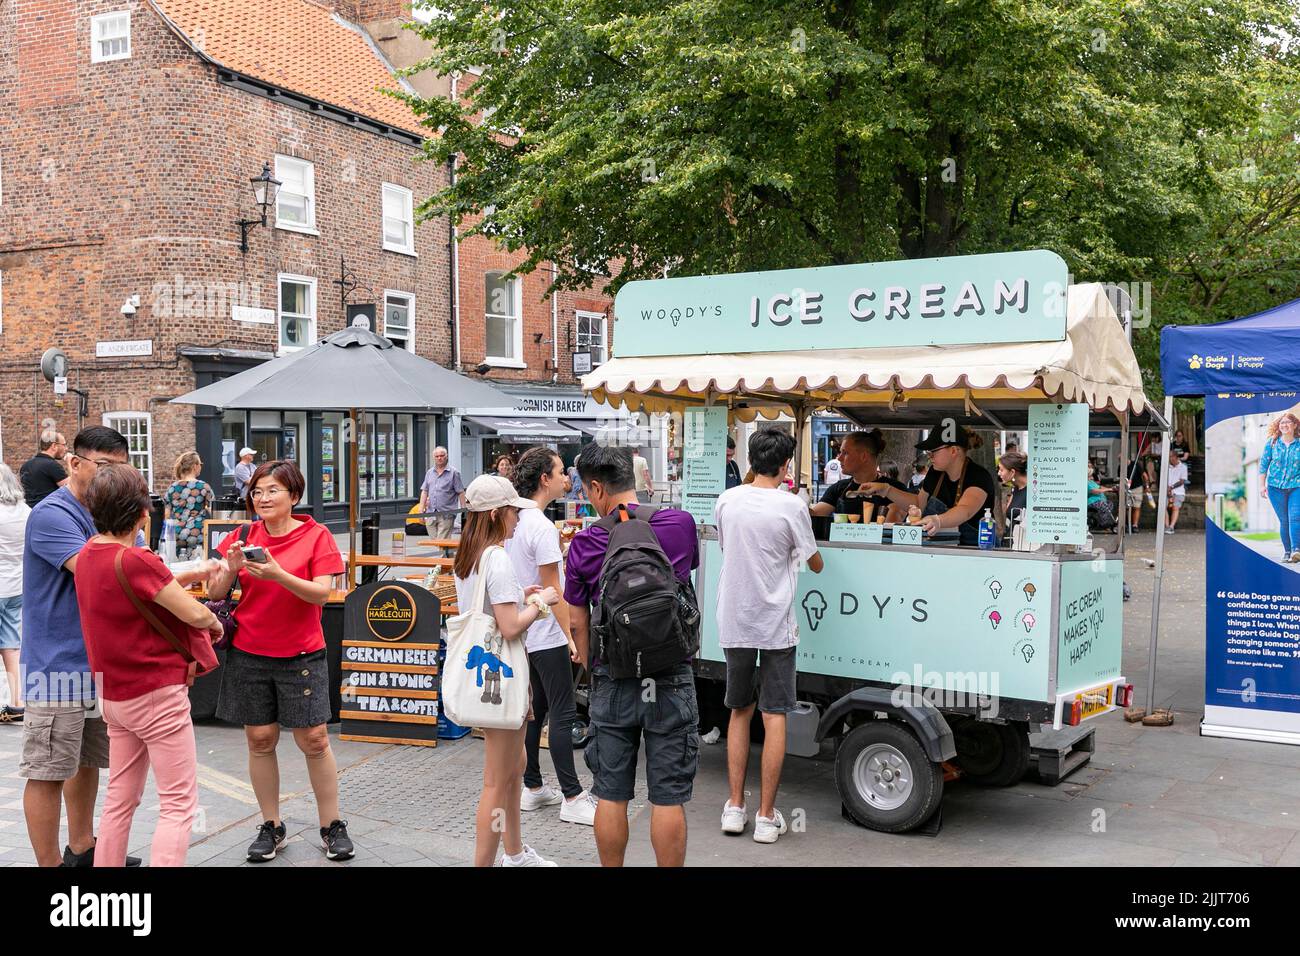 Ice cream vendor stall with a queue of customers on a hot day in the city of York,Yorkshire,England,UK Stock Photo